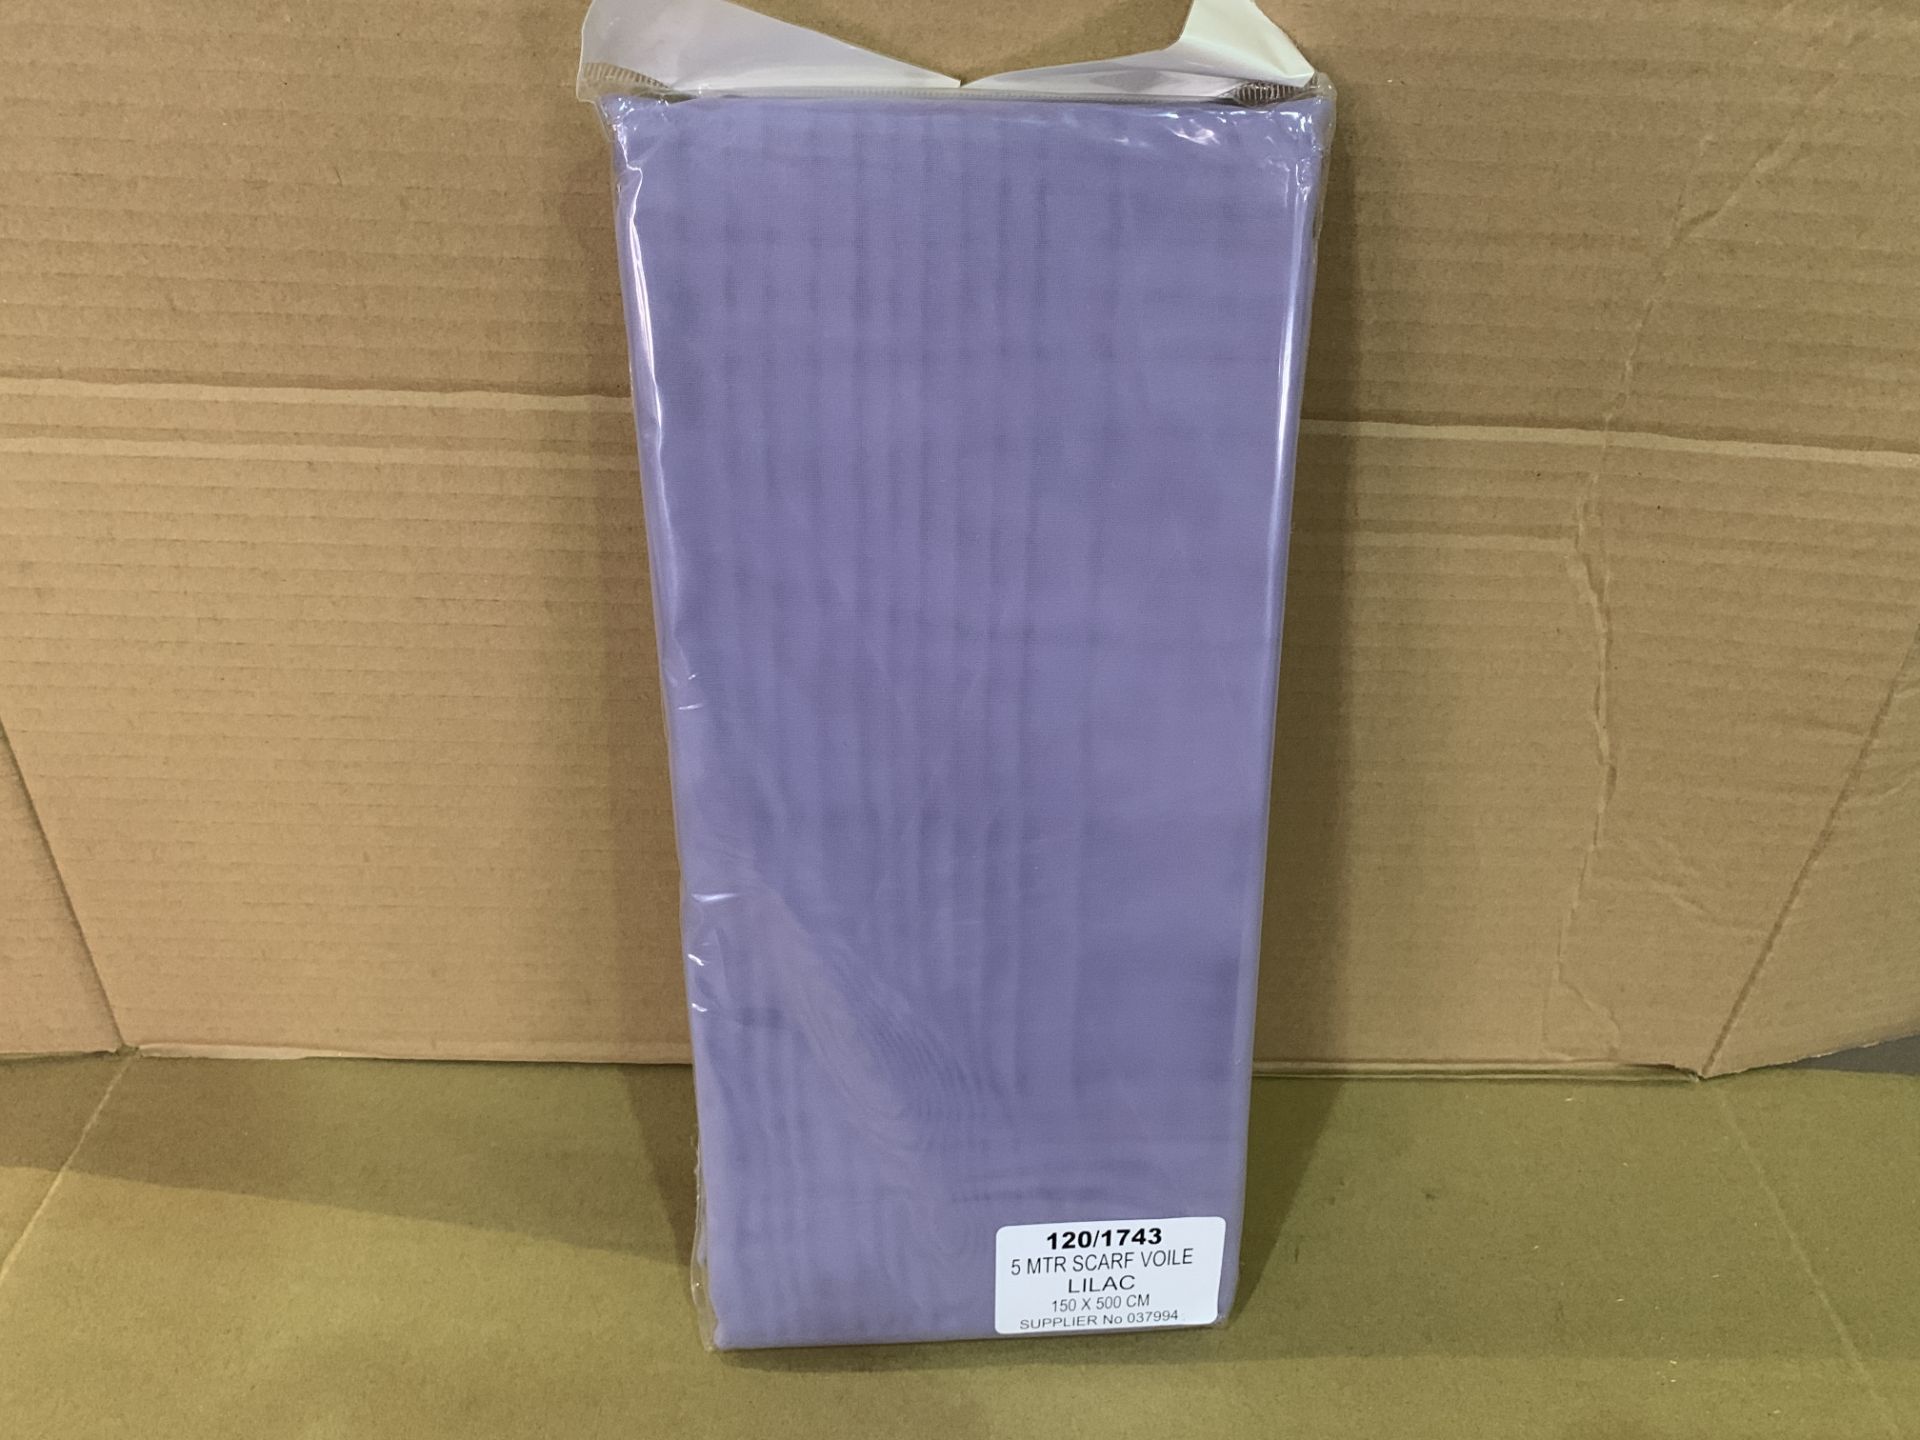 60 X BRAND NEW 5 METER LILAC SCARF VOILES R15